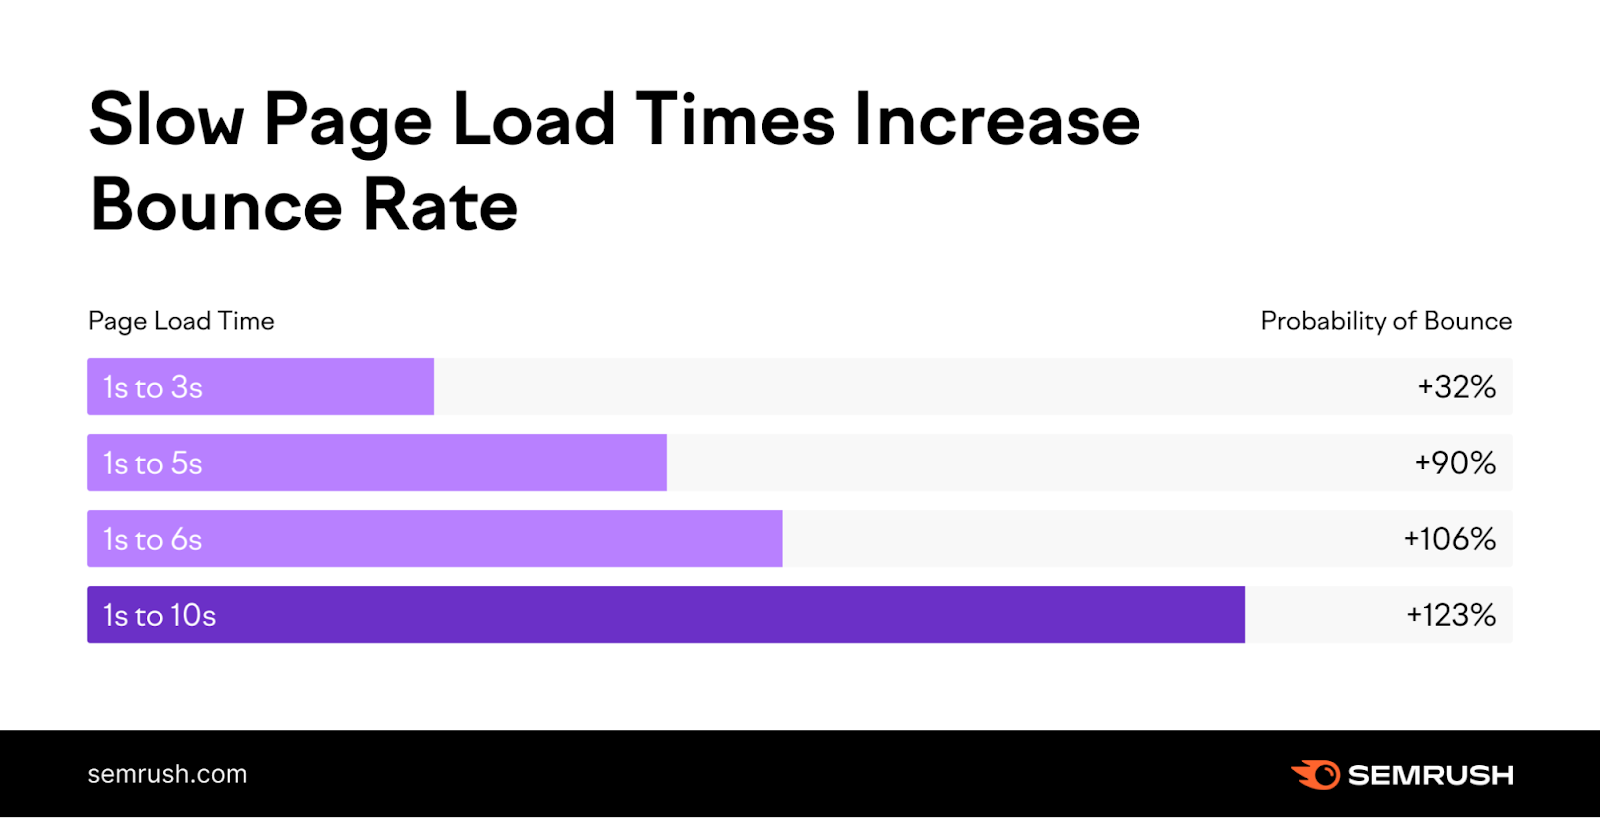 A chart showing how slow page load times increase bounce rates